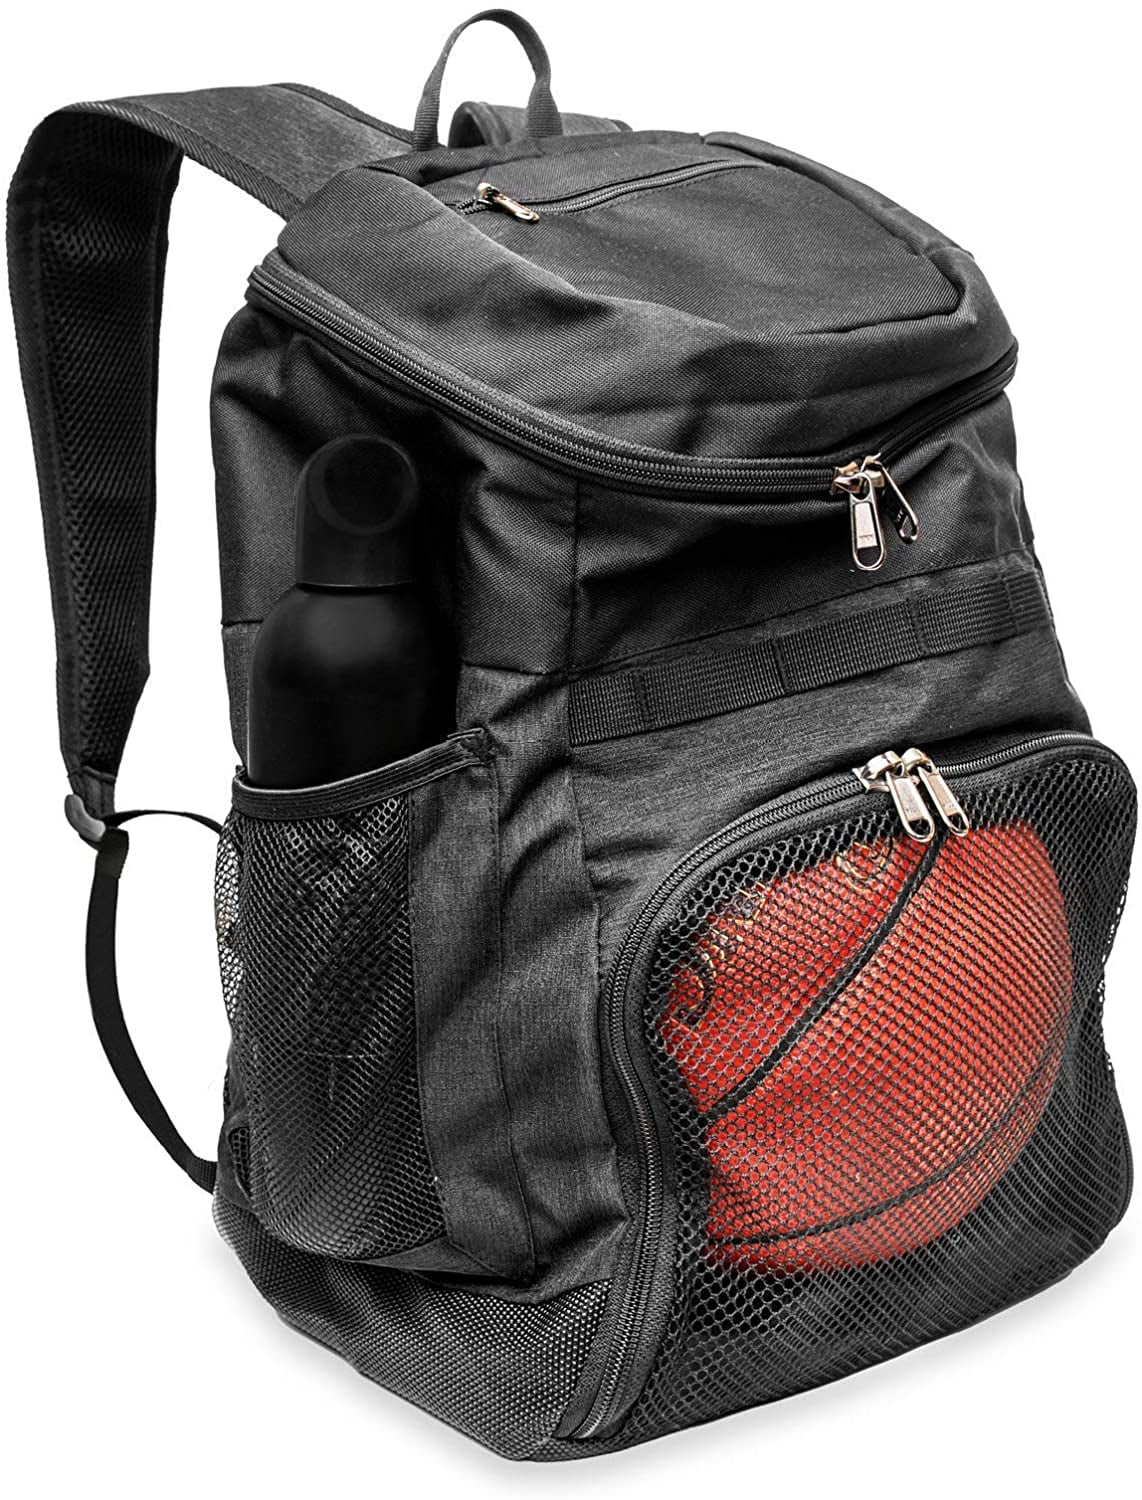 Xelfly Basketball Backpack with Ball Compartment – Sports